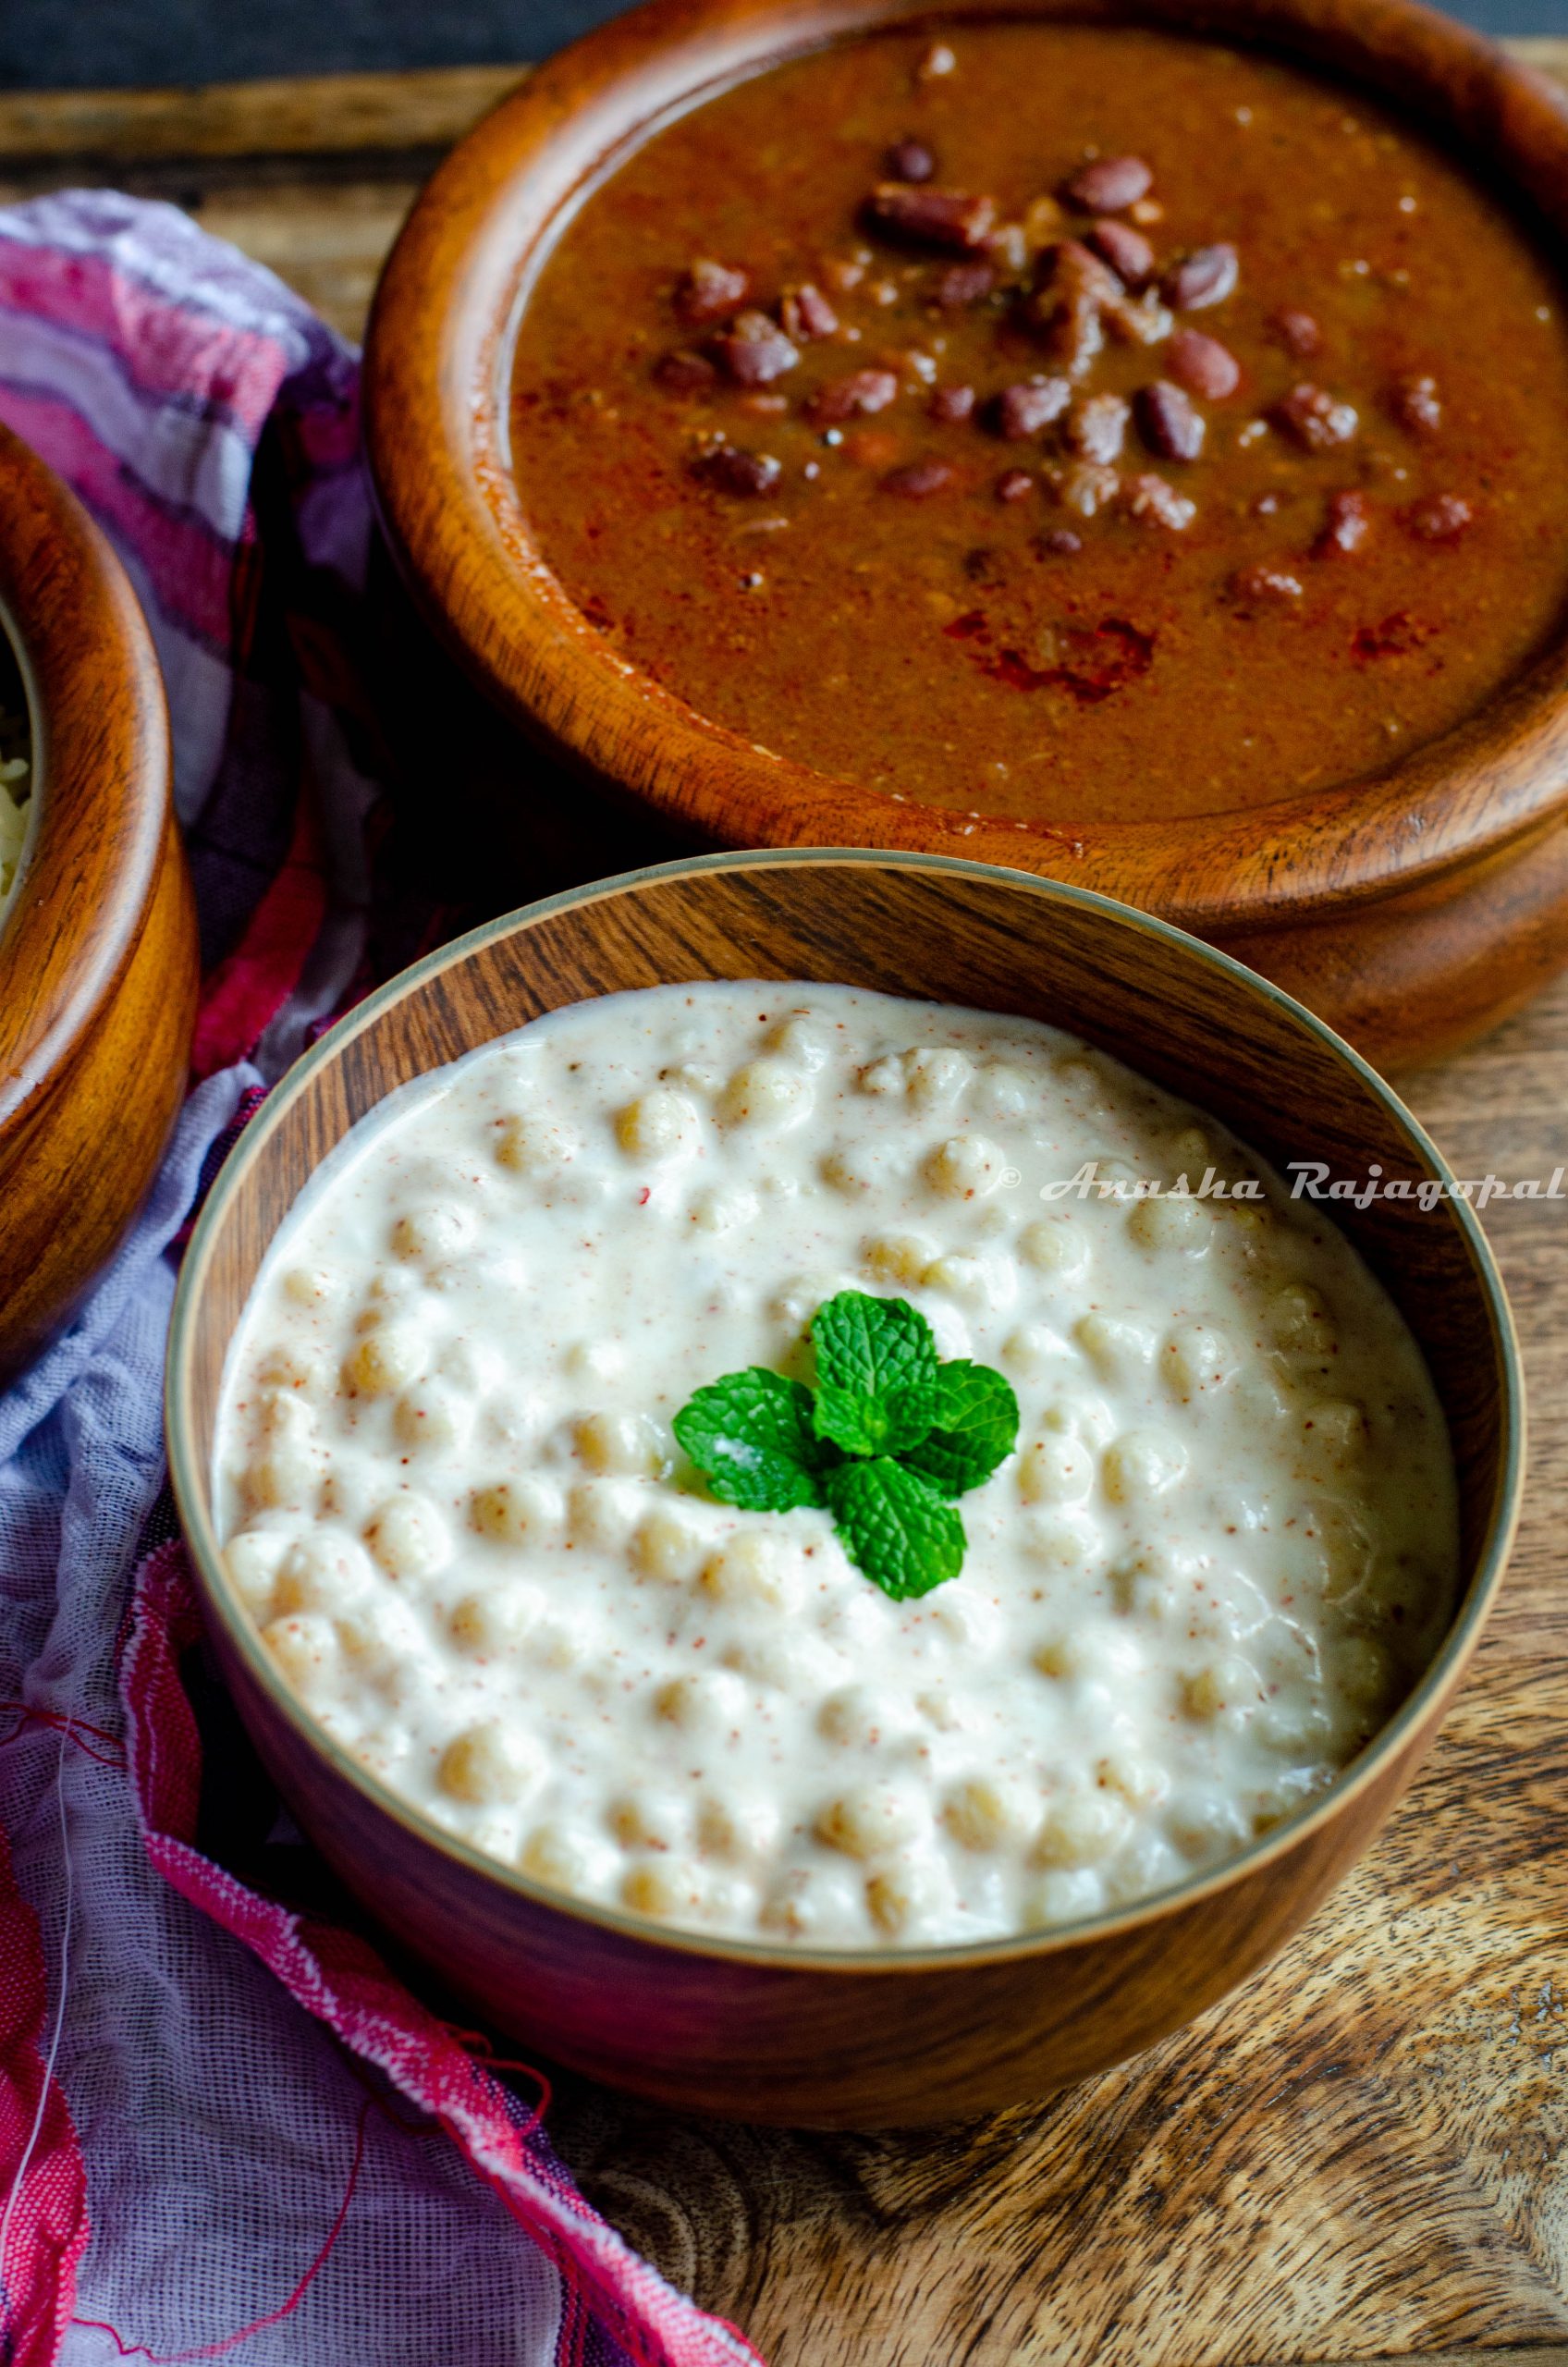 Boondi raita garnished with mint leaves and served in a wooden bowl